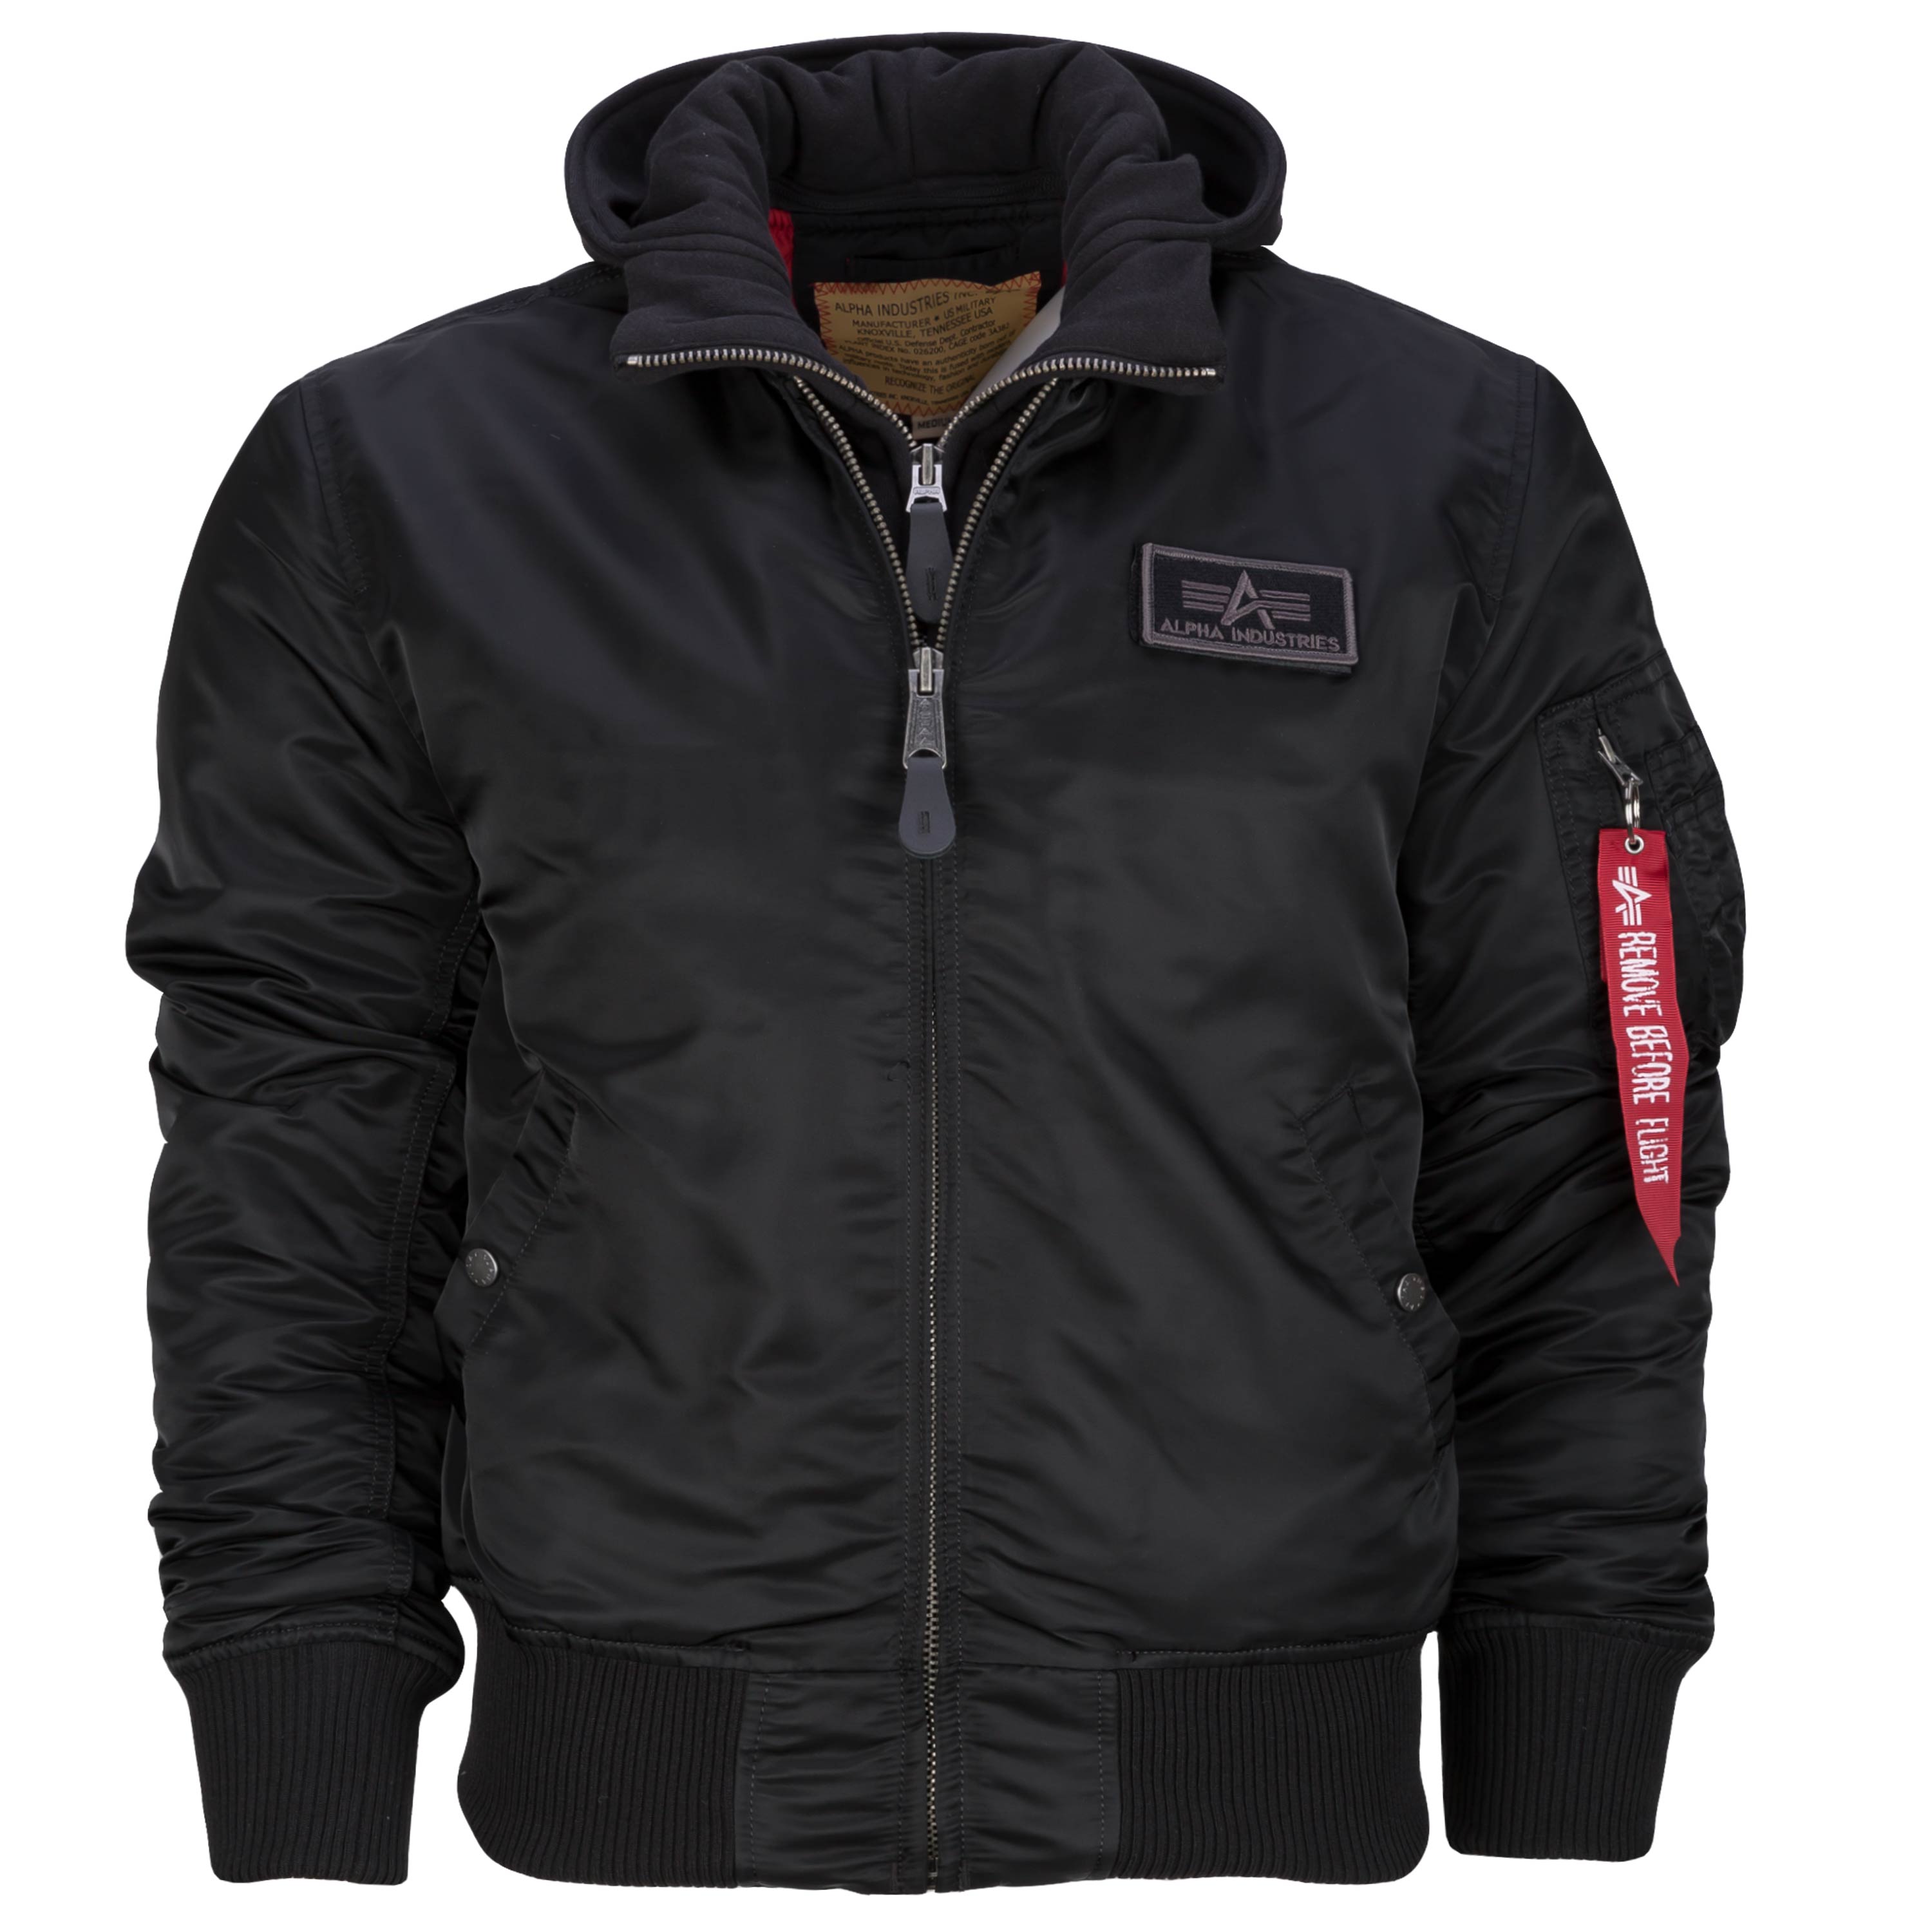 Purchase The Alpha Industries Jacket Ma 1 D Tec Black Ii By Asmc